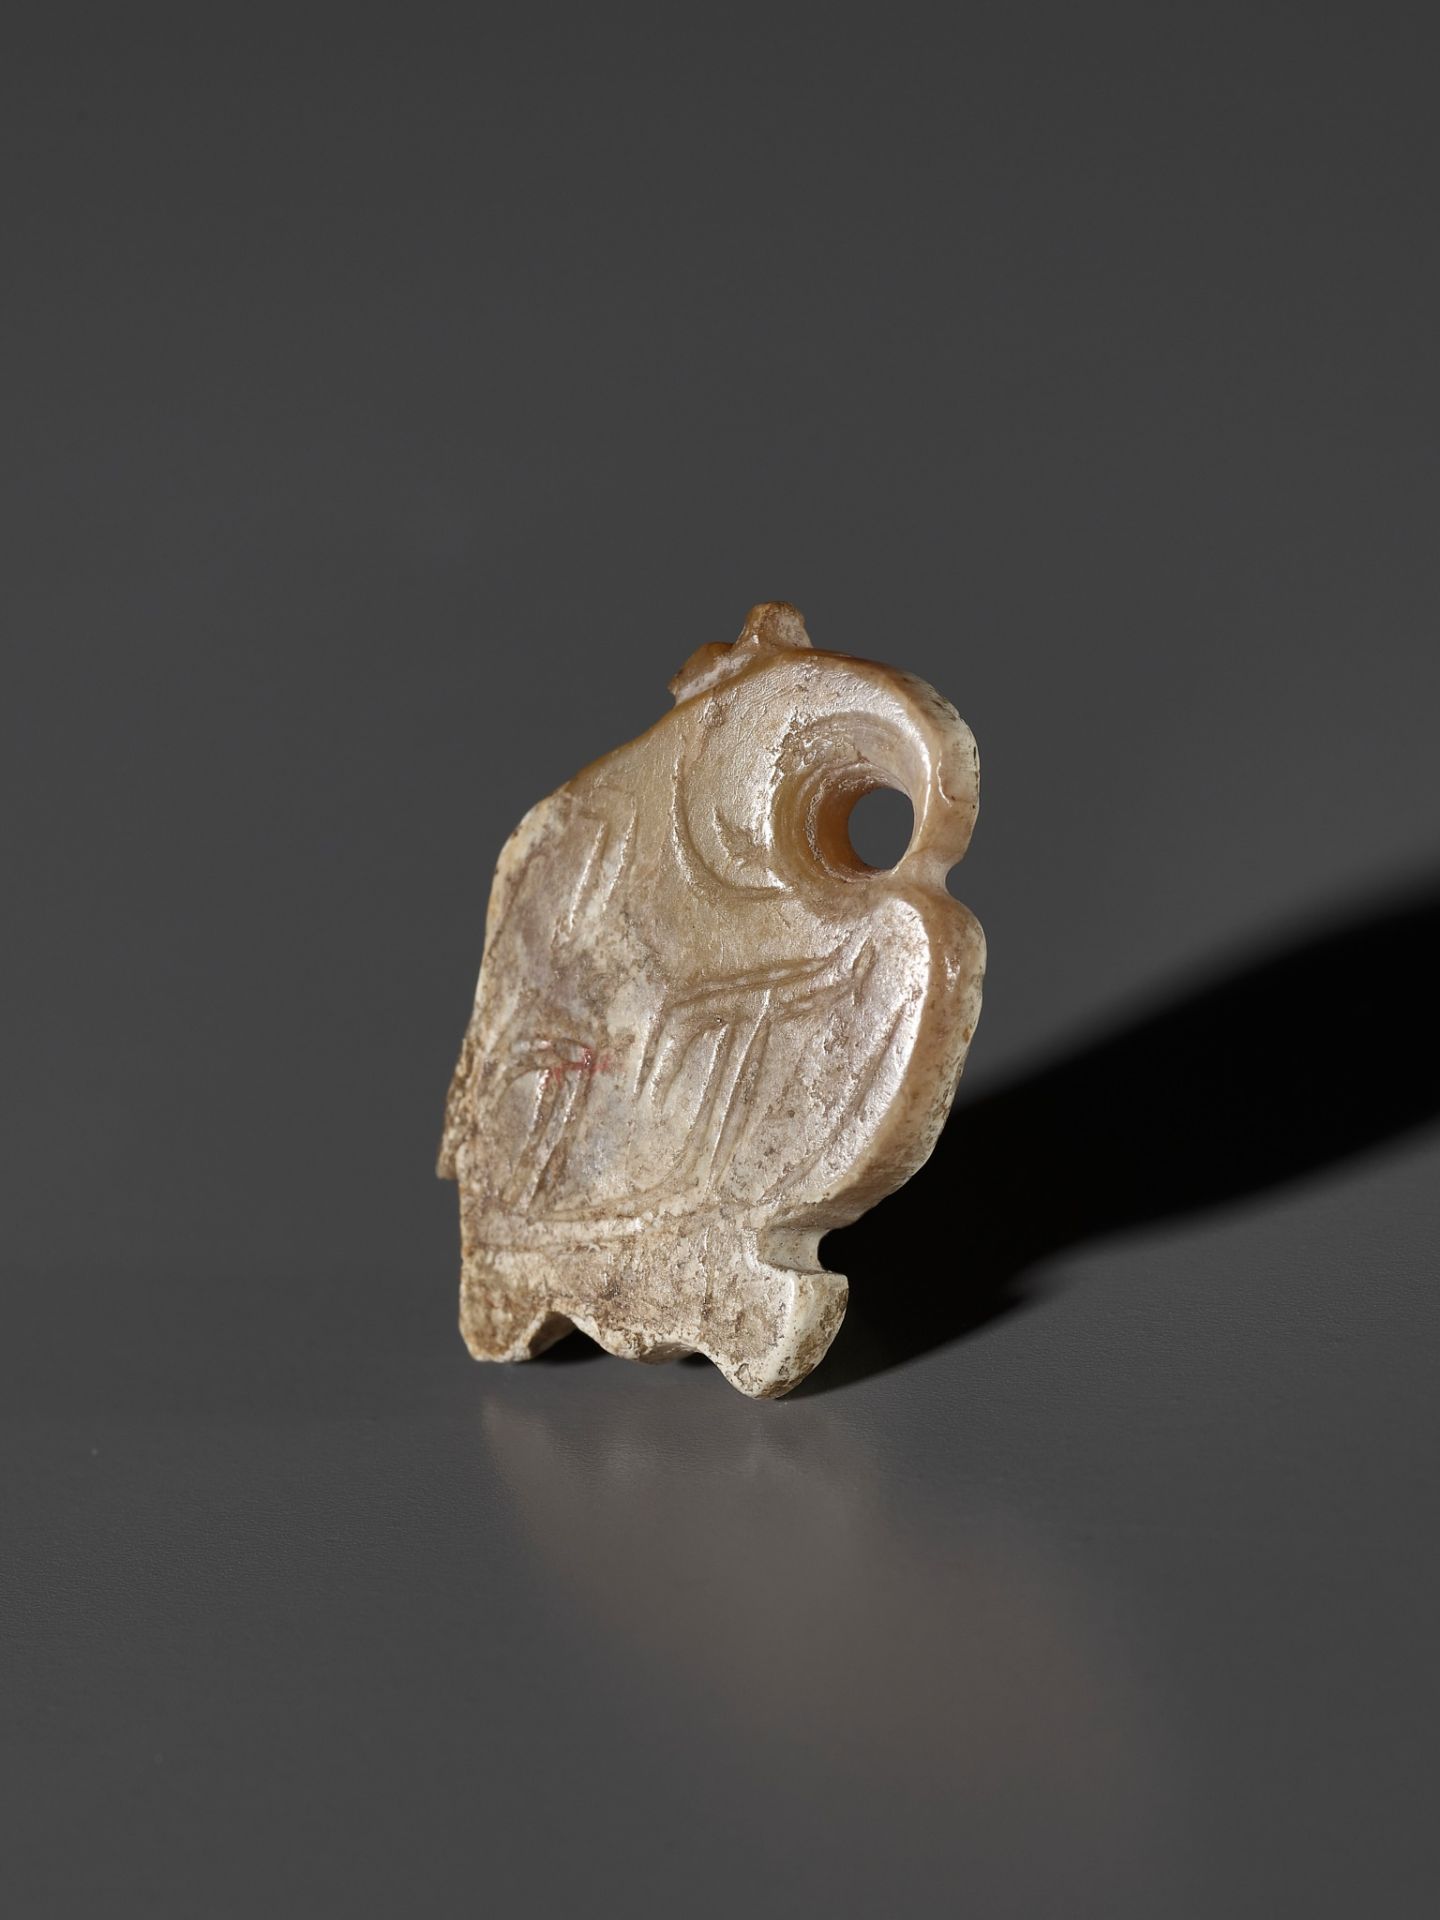 A PALE CELADON AND RUSSET JADE 'BIRD' PENDANT, LATE SHANG DYNASTY - Image 3 of 9